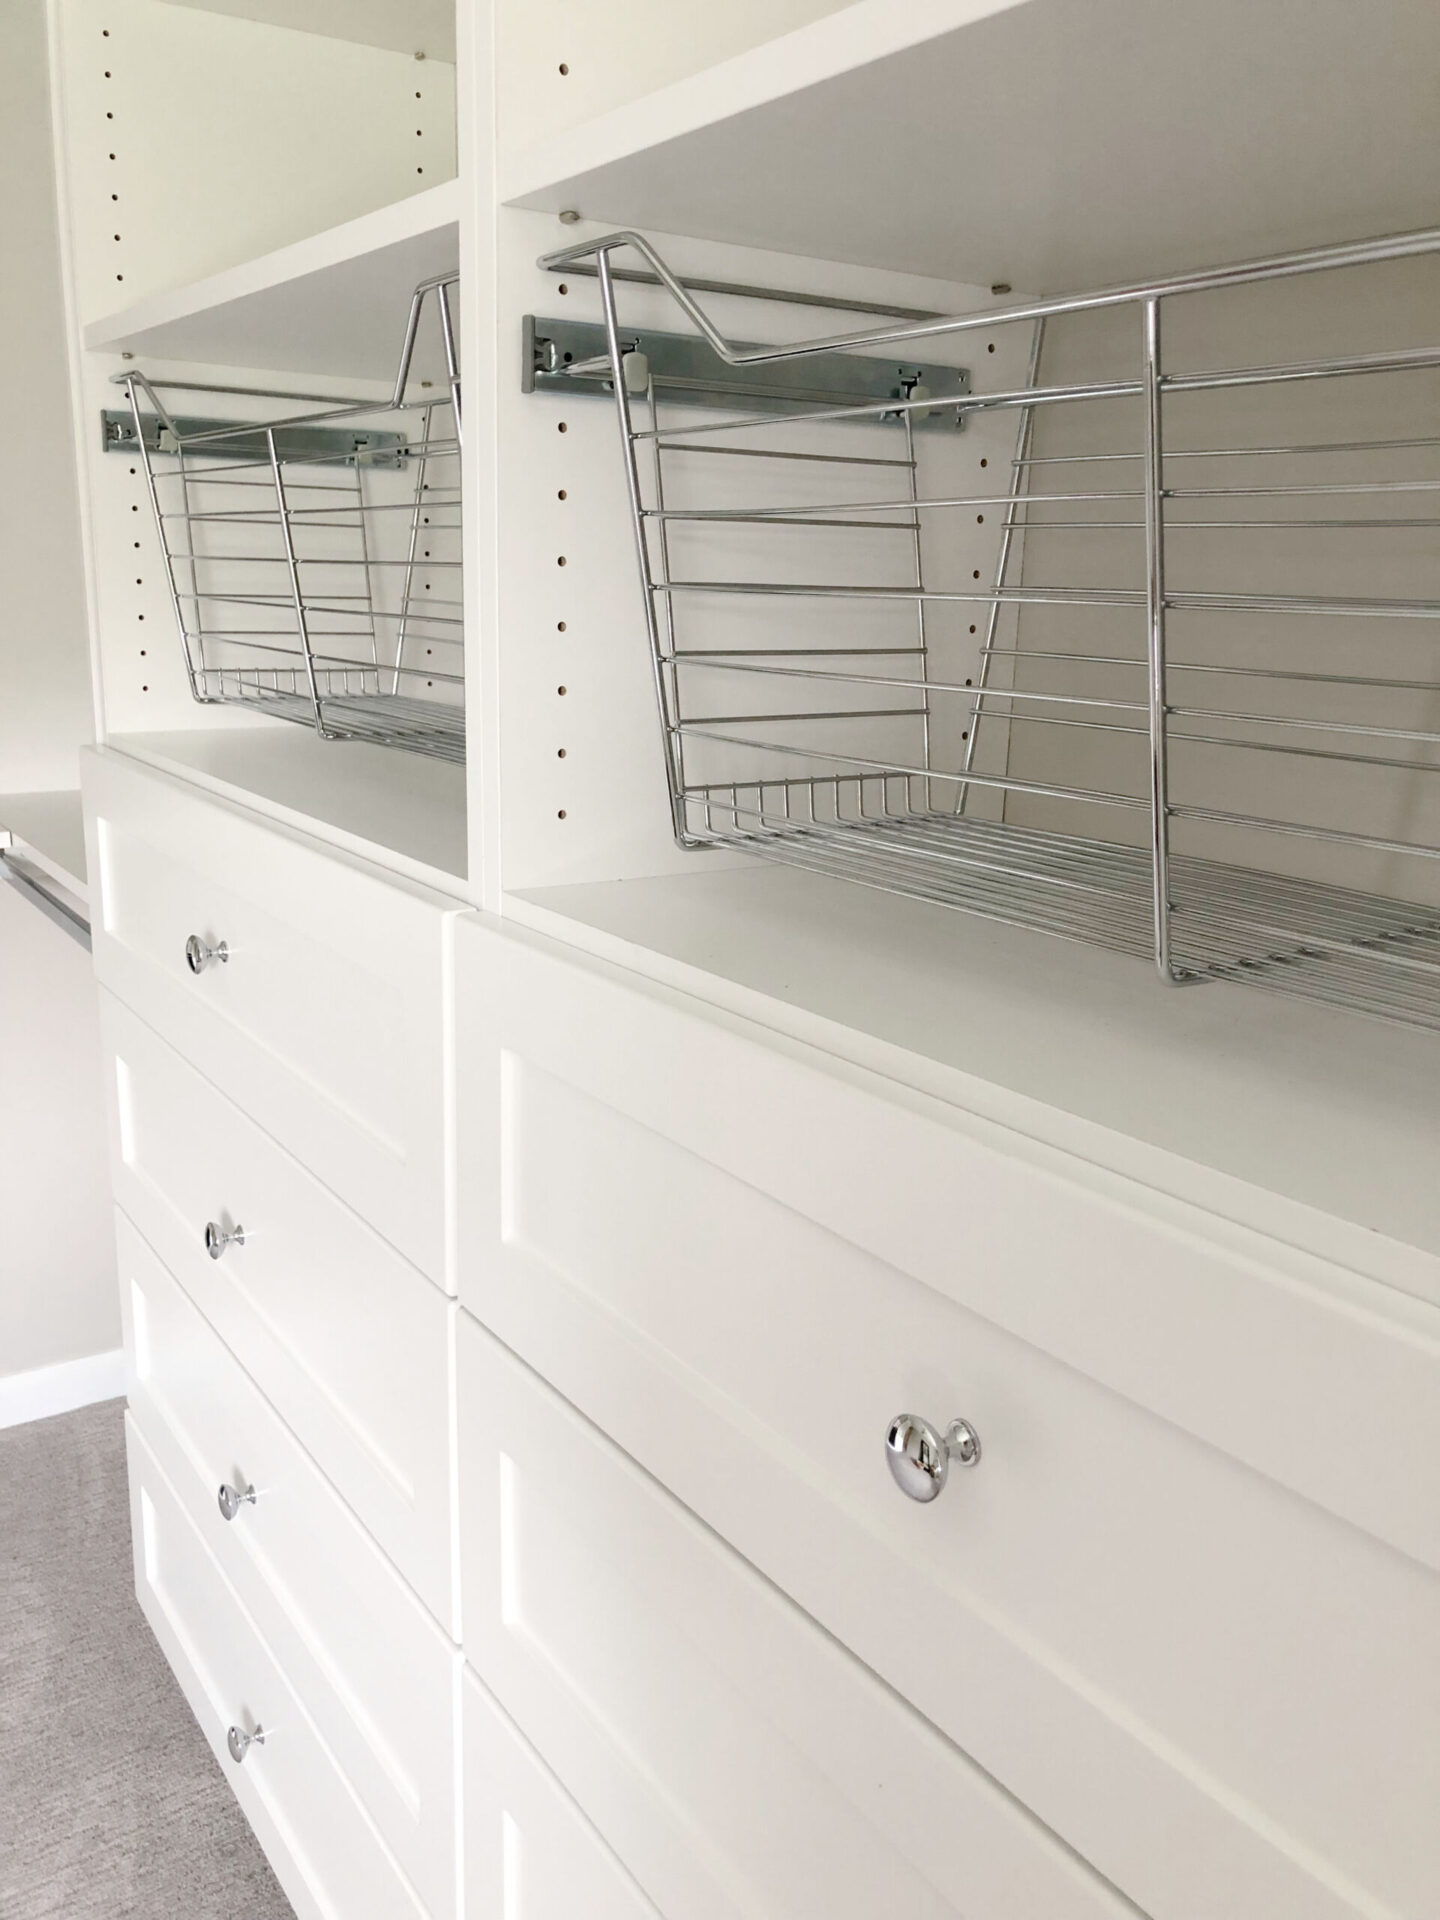 Detail of Modular Closets Vista shelves and chrome pull out drawers. - Hello Lovely